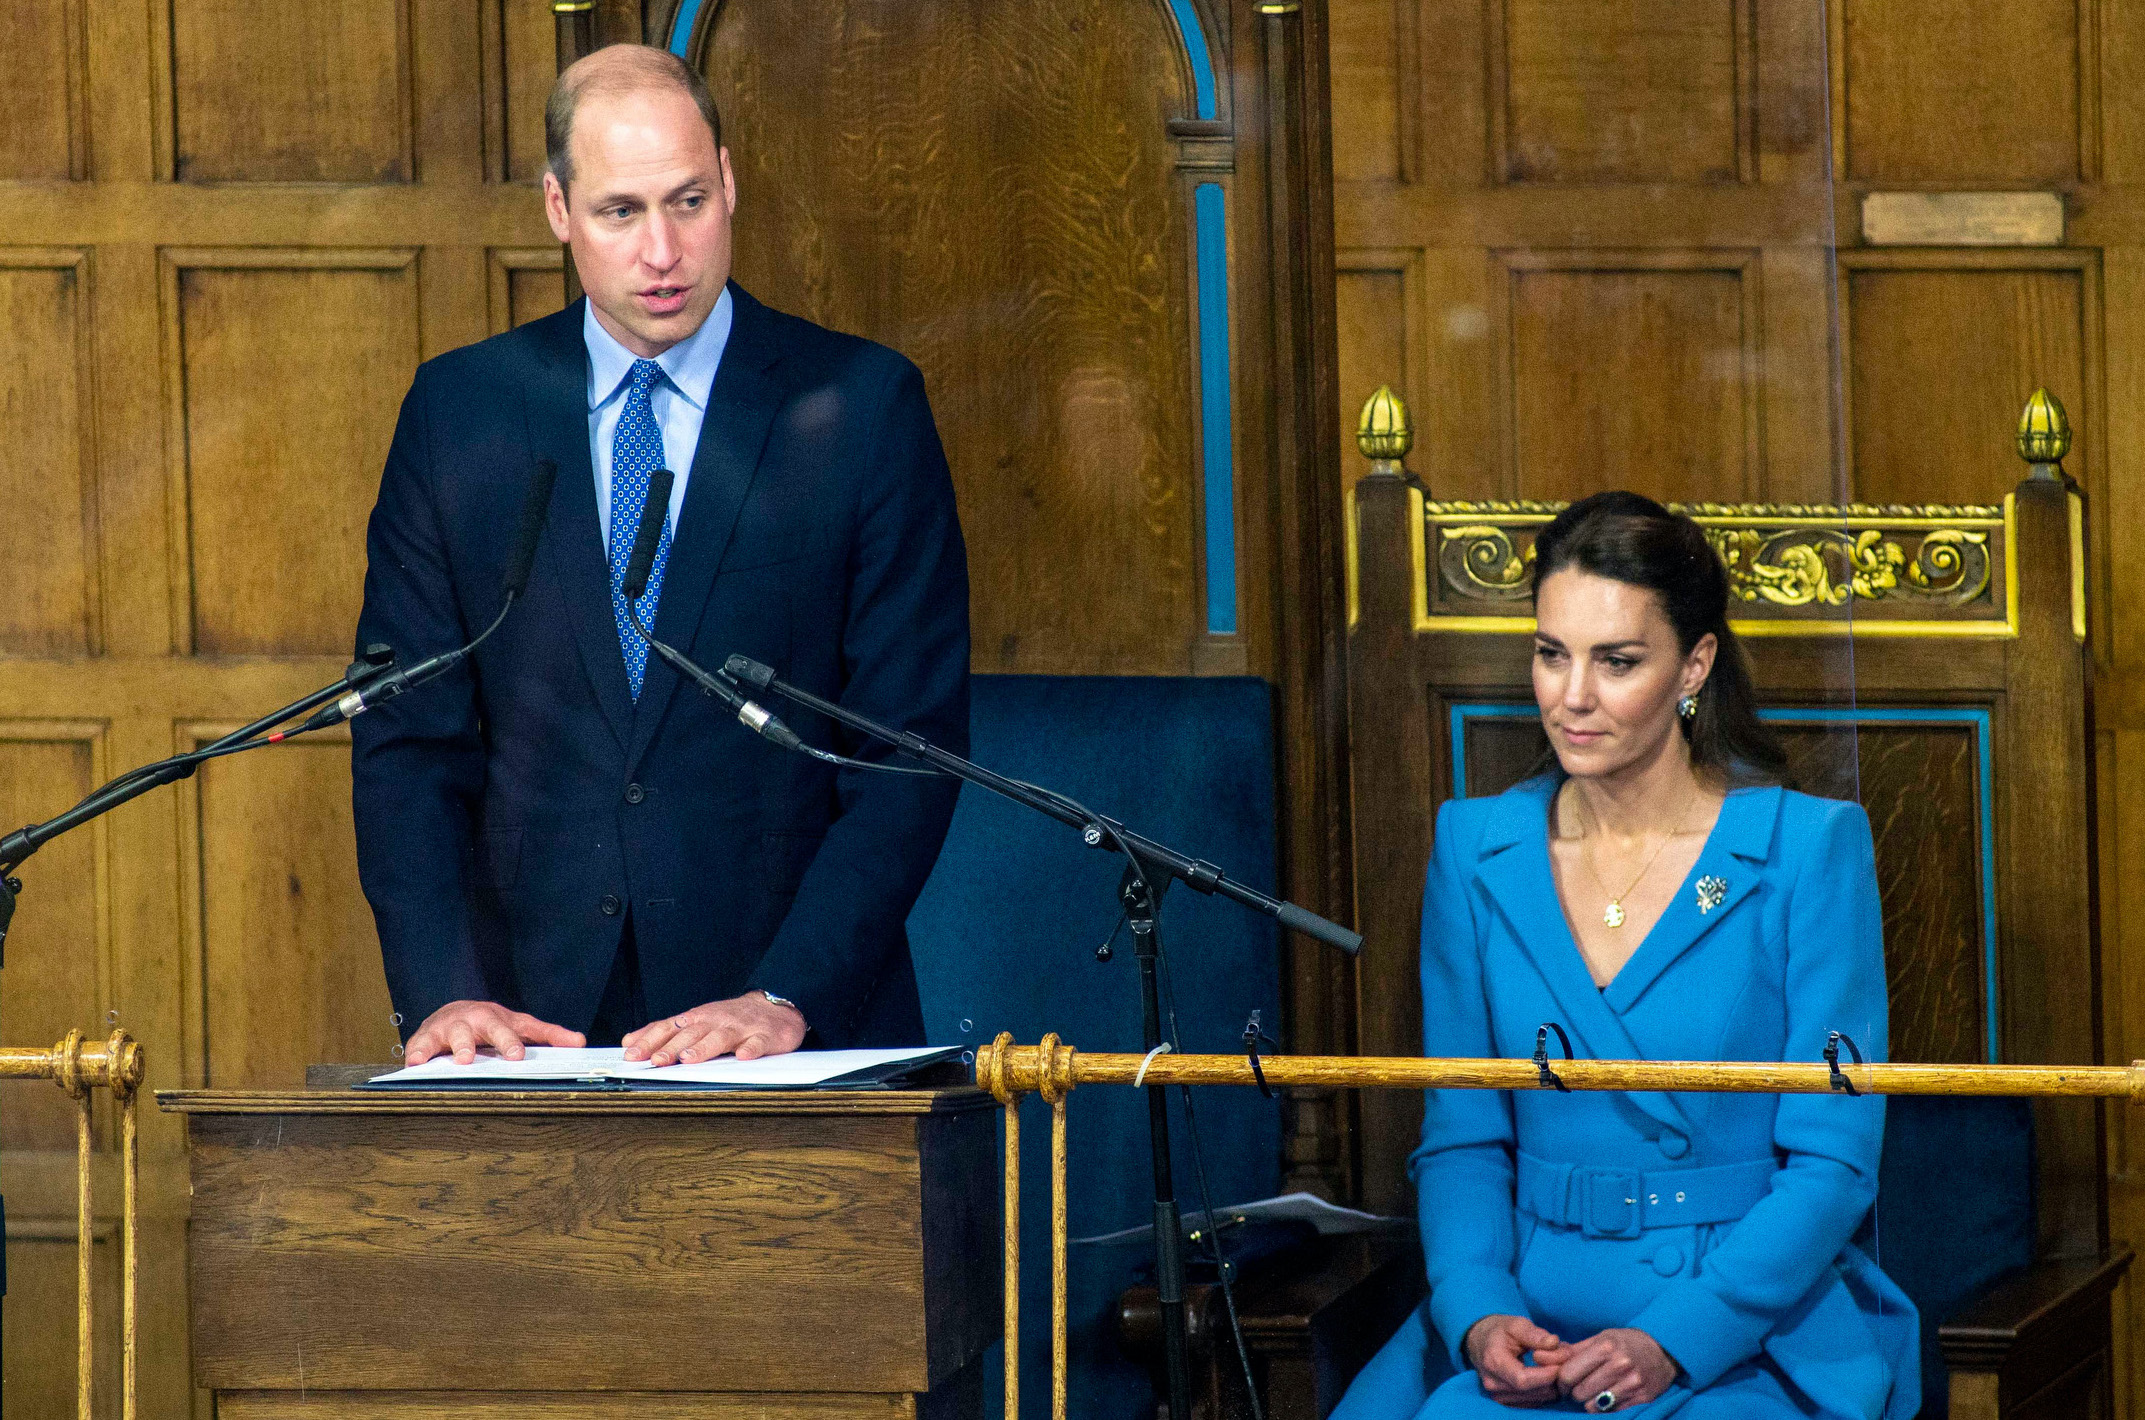 Amidst Prince Charles’ Charity Scanda lPrince William, Kate Middleton ‘Fast-Tracked To The Throne’.